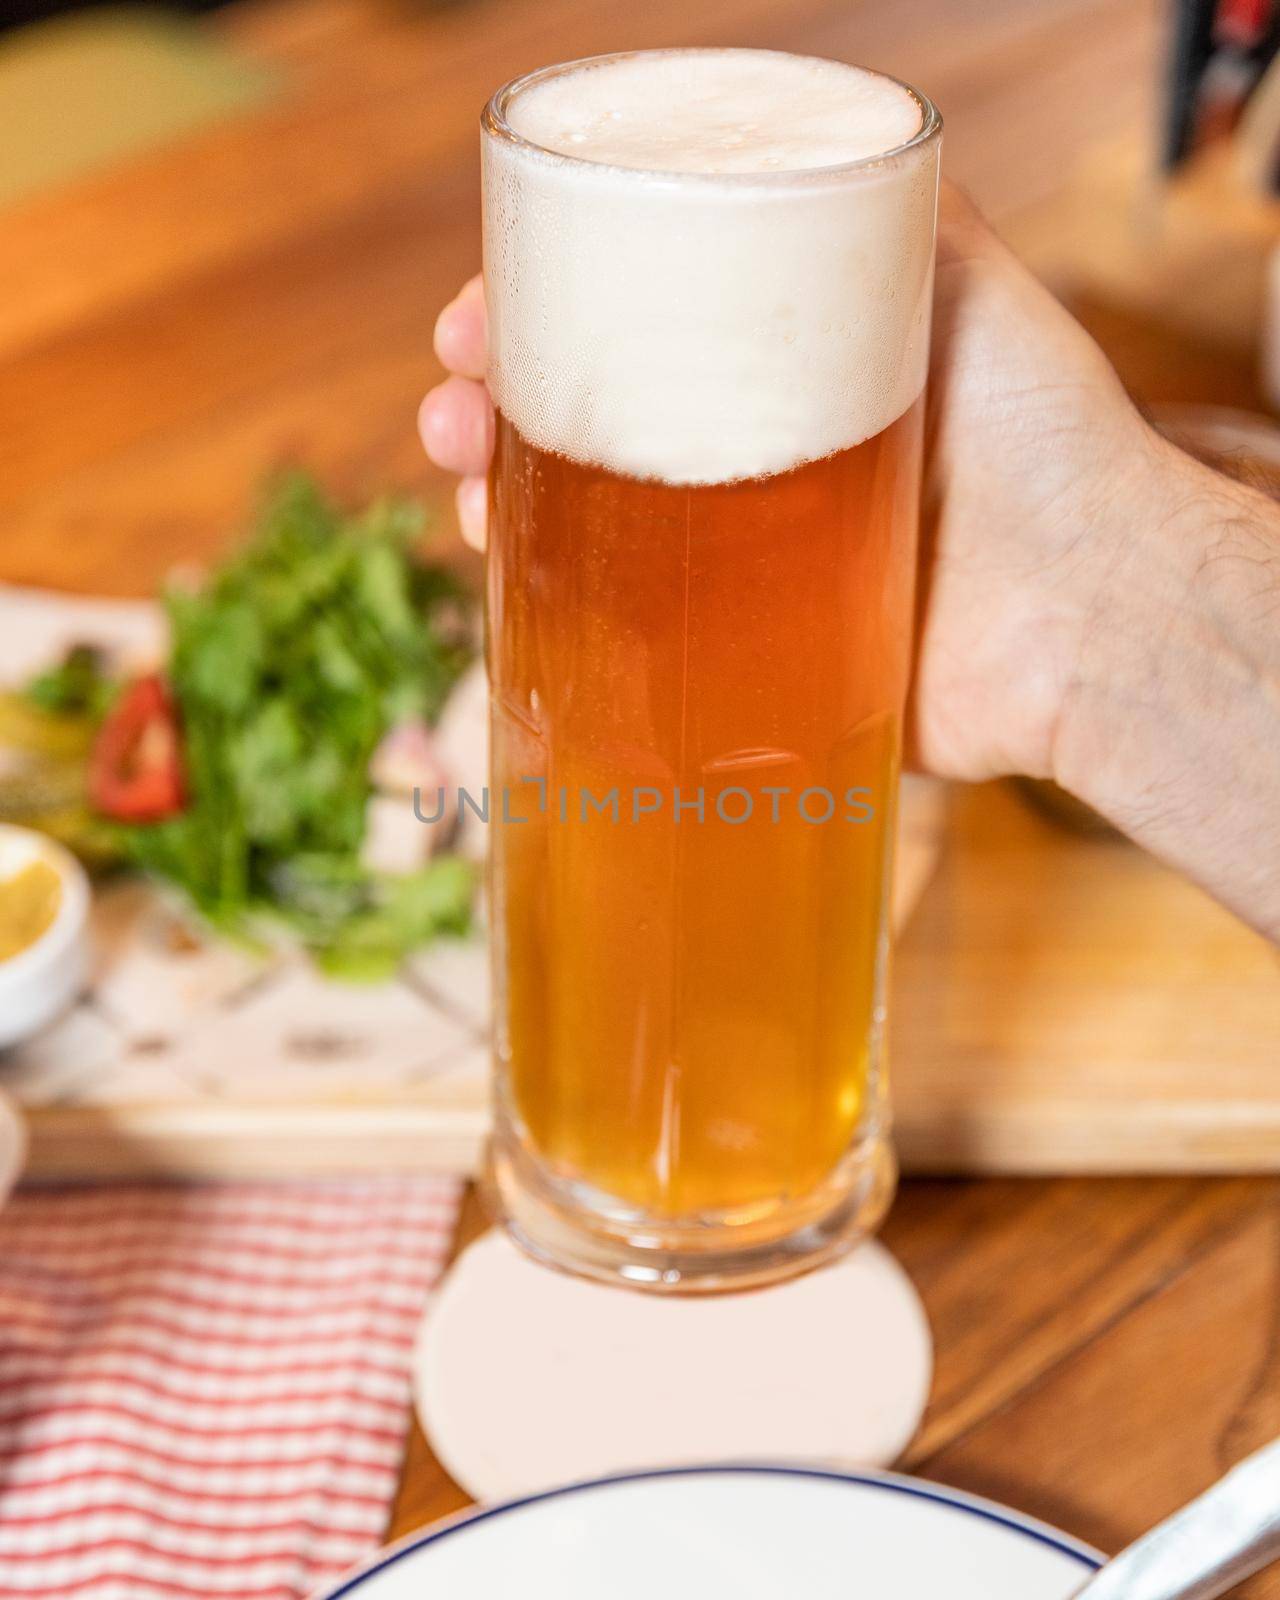 Holding beer drink mug glass, empty place for logo, name by ferhad